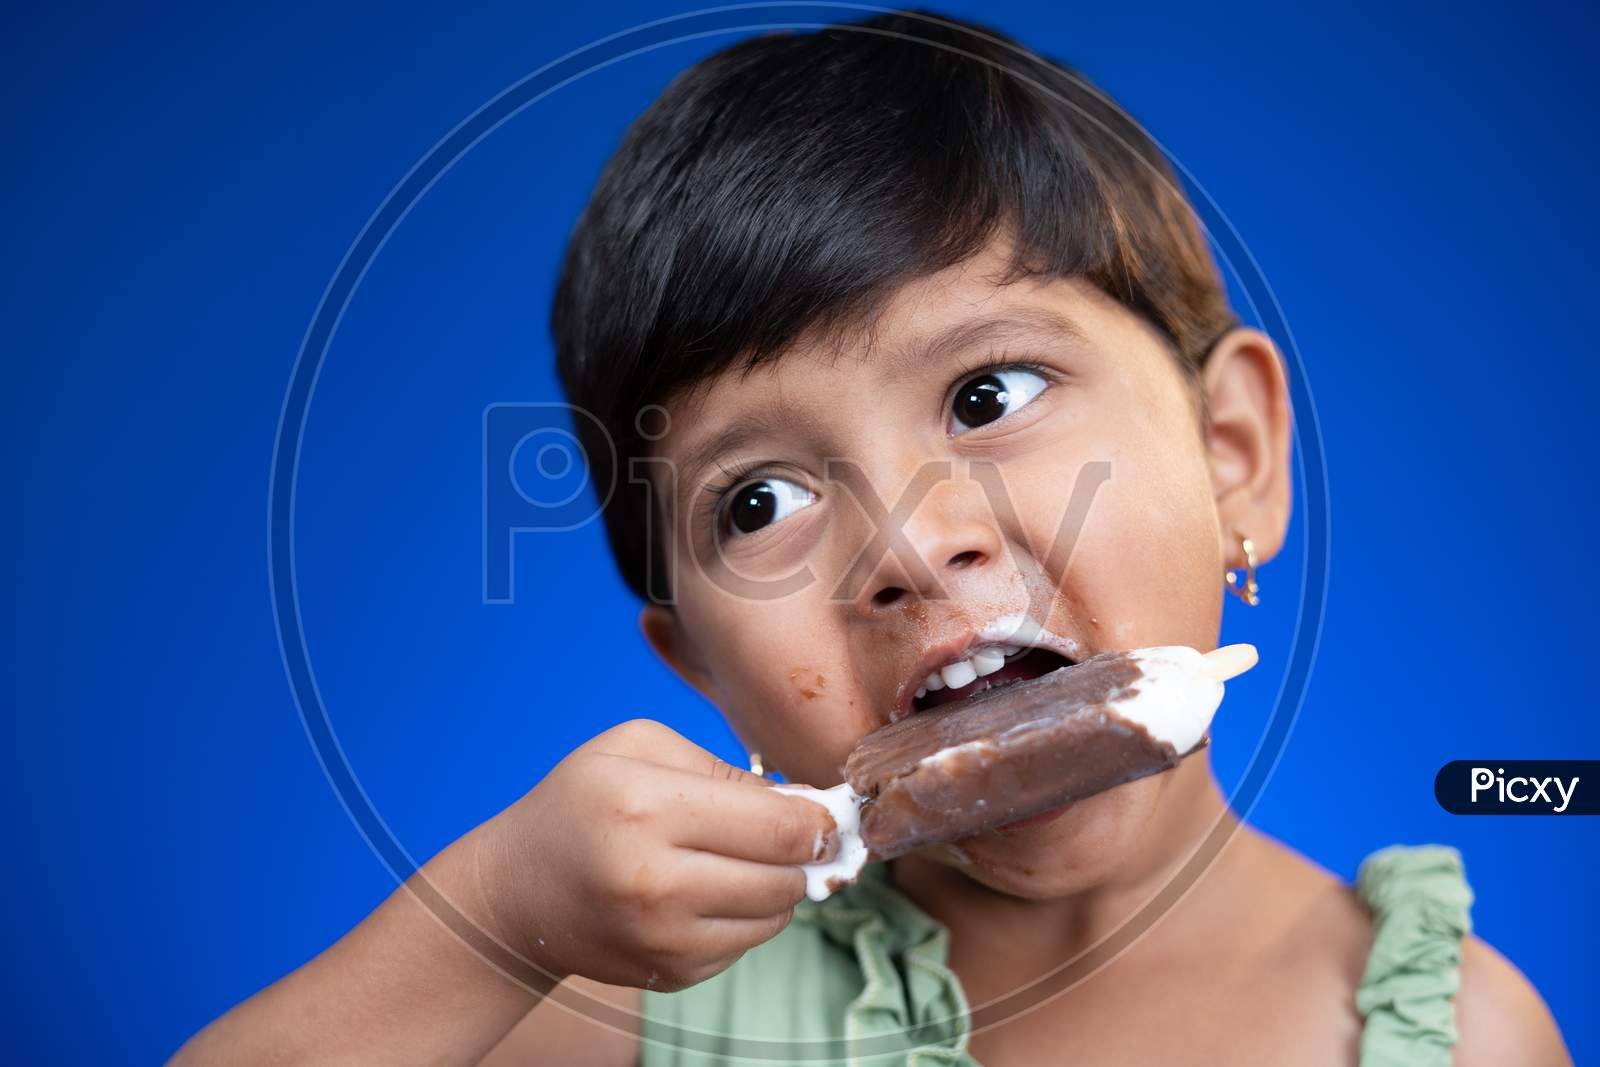 Cloe Up Head Shot Of Girl Kid Busy Eating Ice Cream On Blue Studio Background - Concept Of Unhealthy Food Consumption